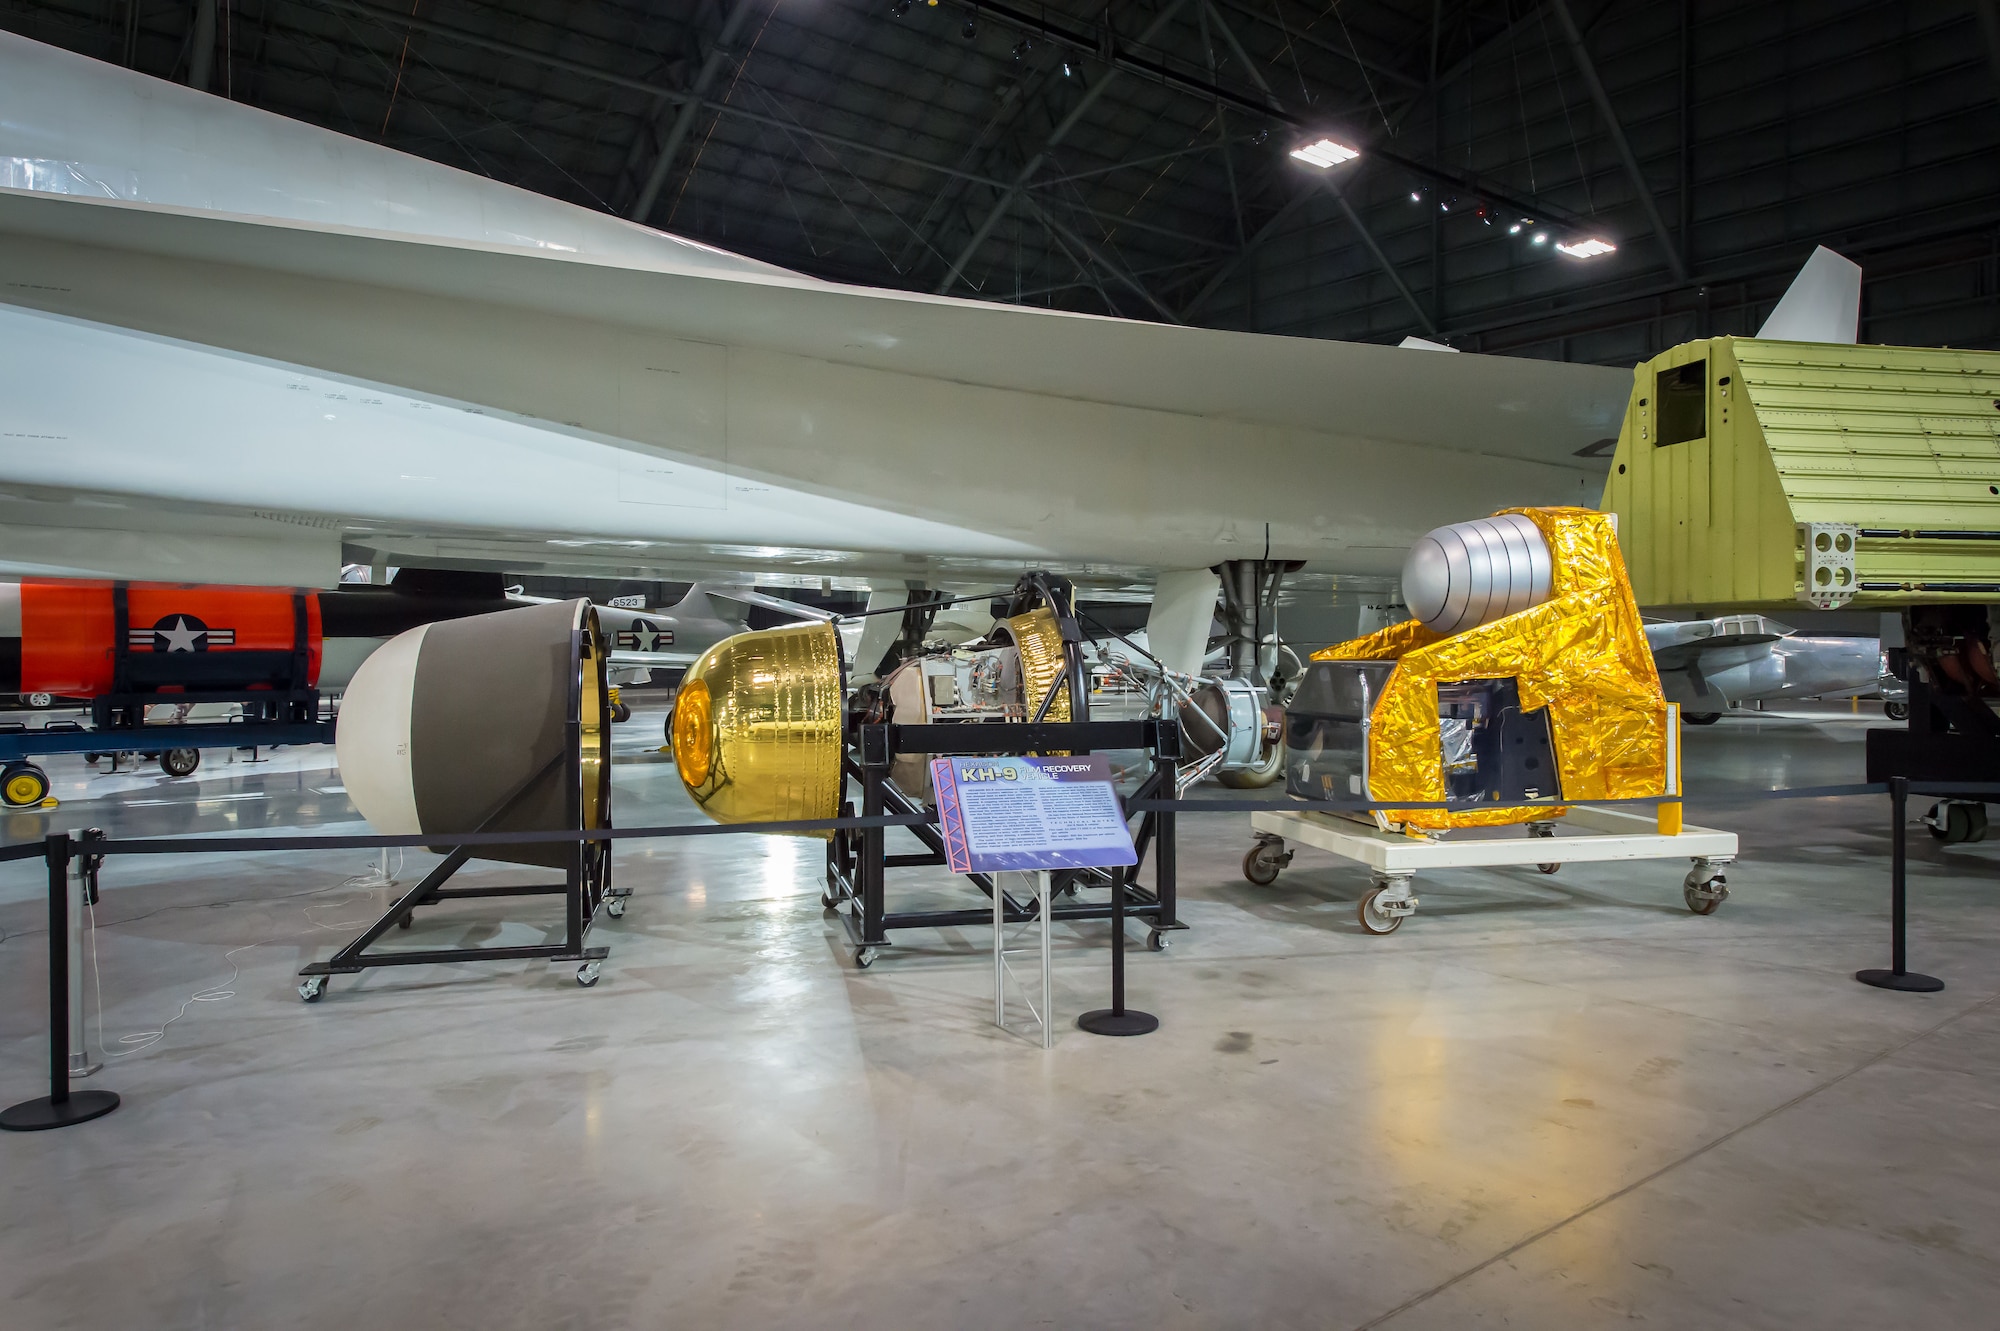 DAYTON, Ohio -- The HEXAGON KH-9 Reconnaissance Satellite in the Space Gallery at the National Museum of the U.S. Air Force. (U.S. Air Force photo by Jim Copes)
